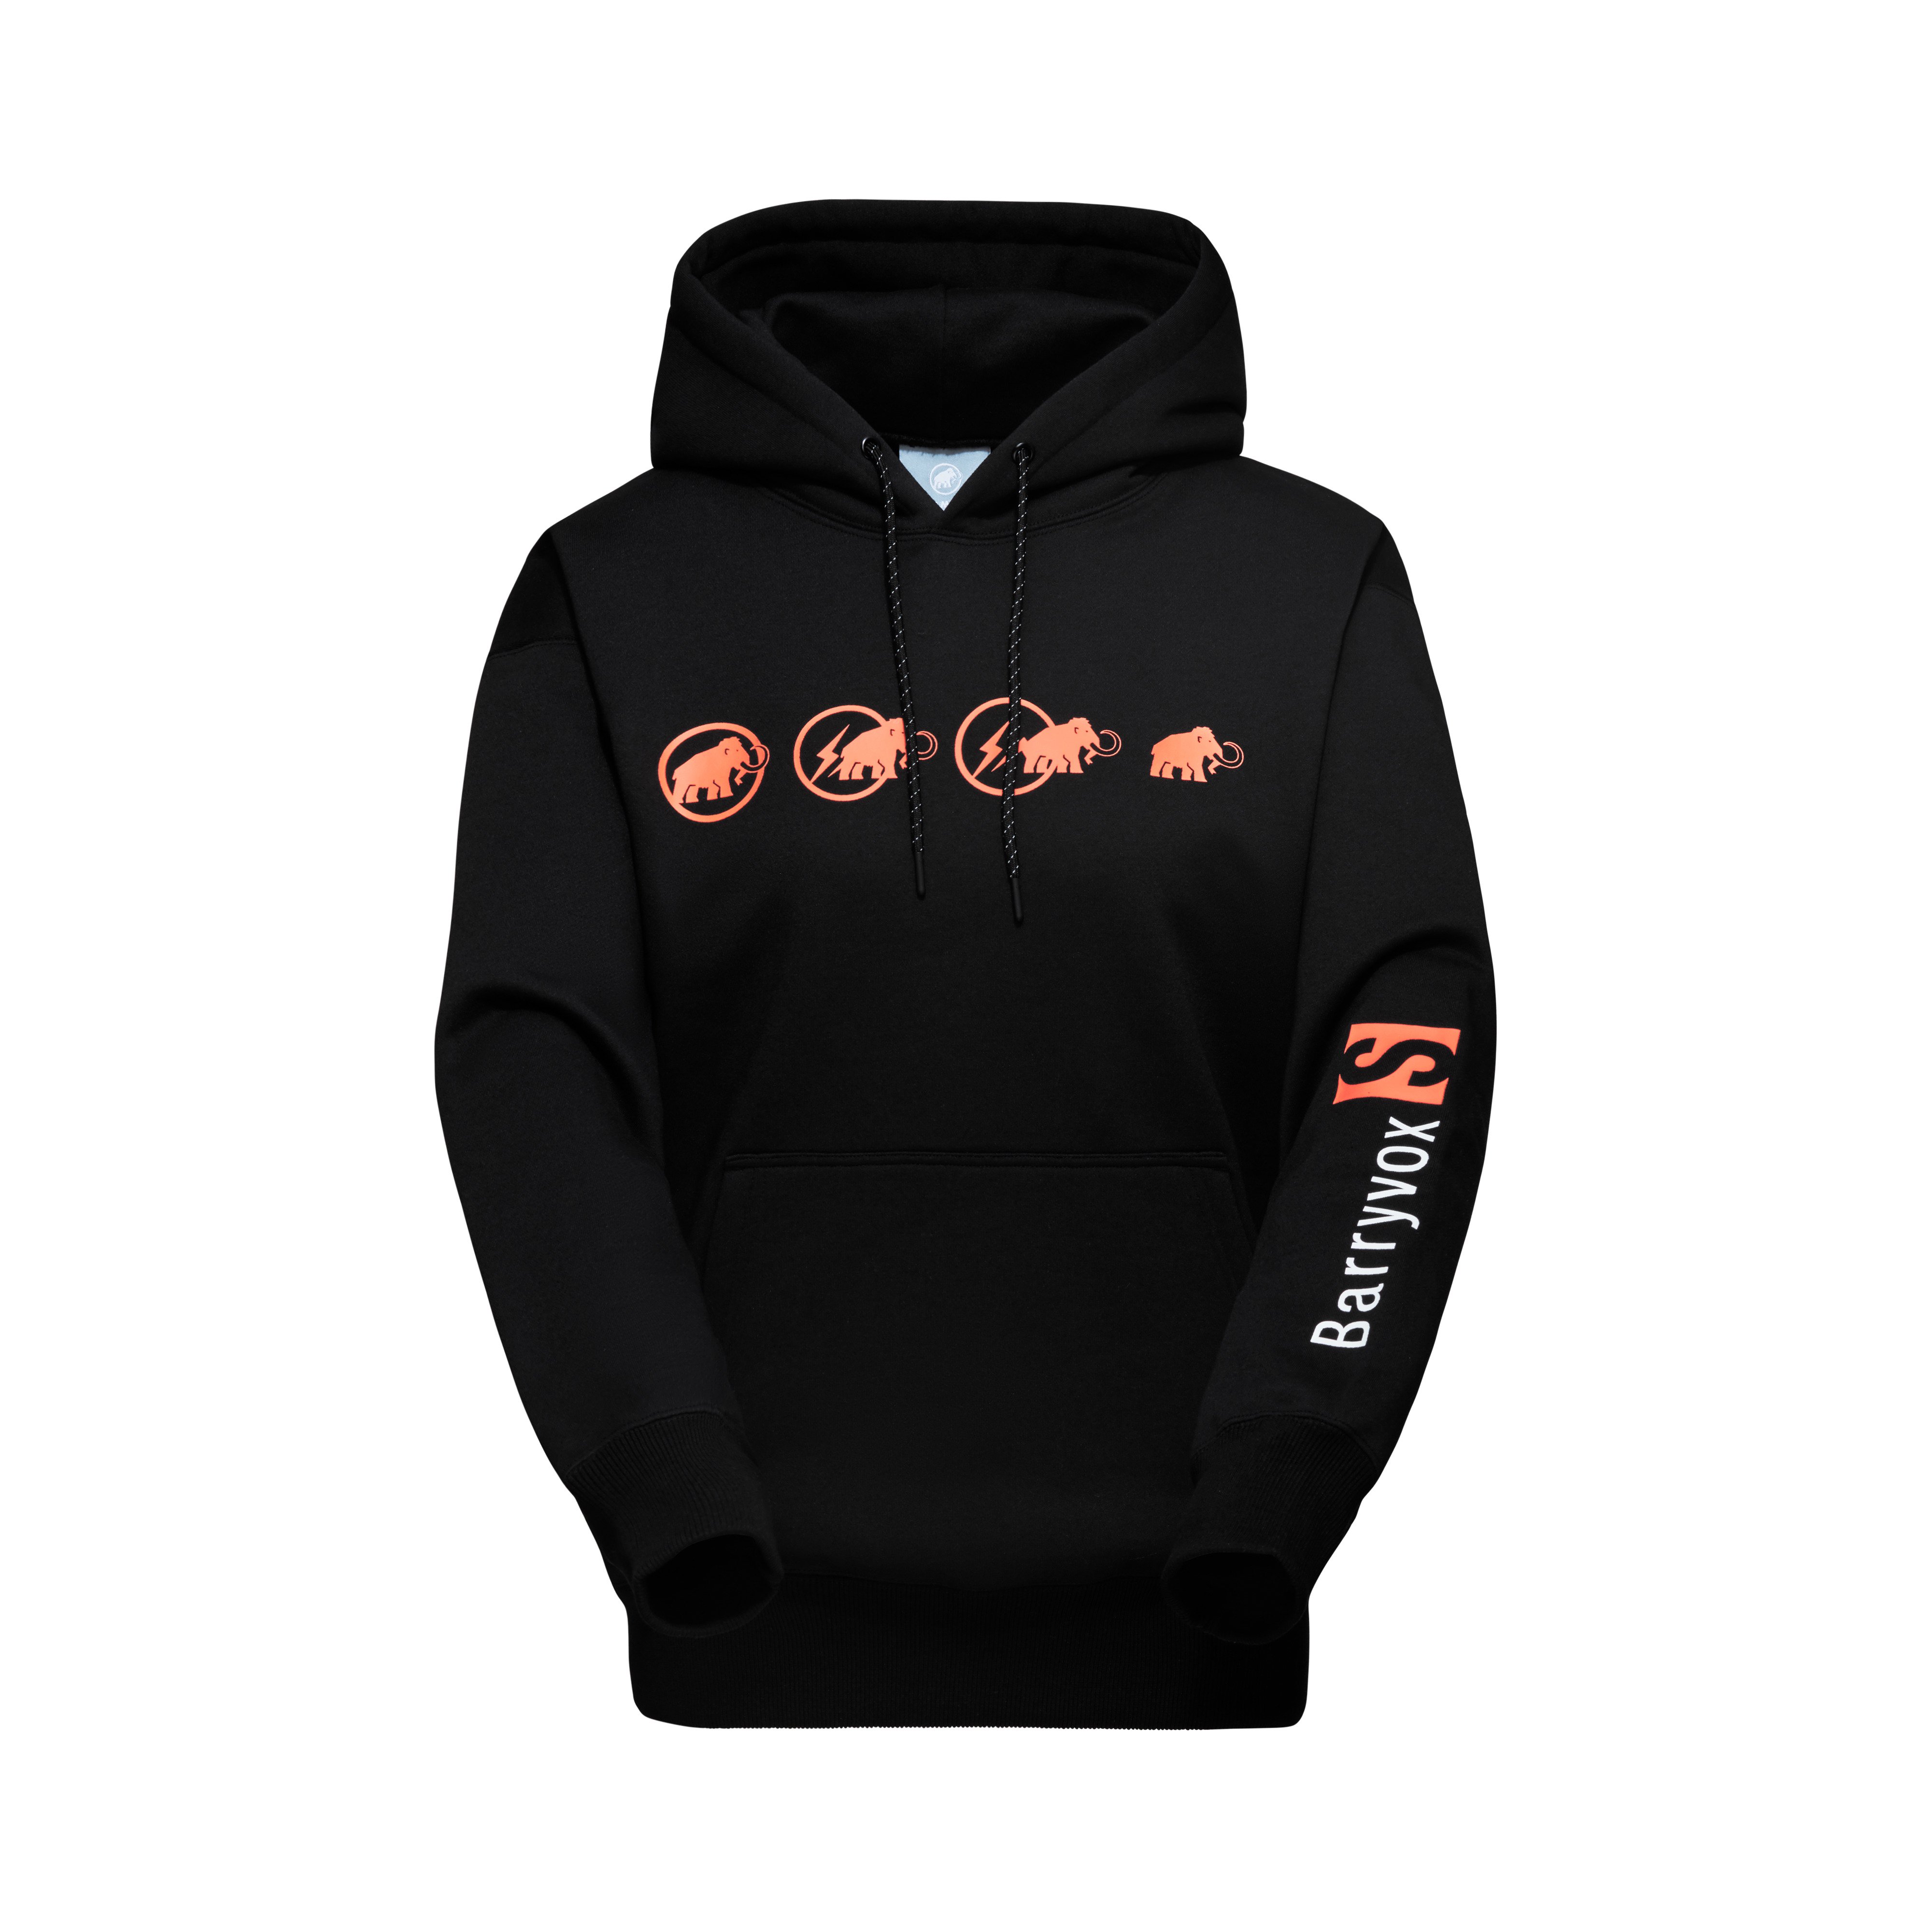 Barryvox ML Hoody with FRGMT - black, L product image